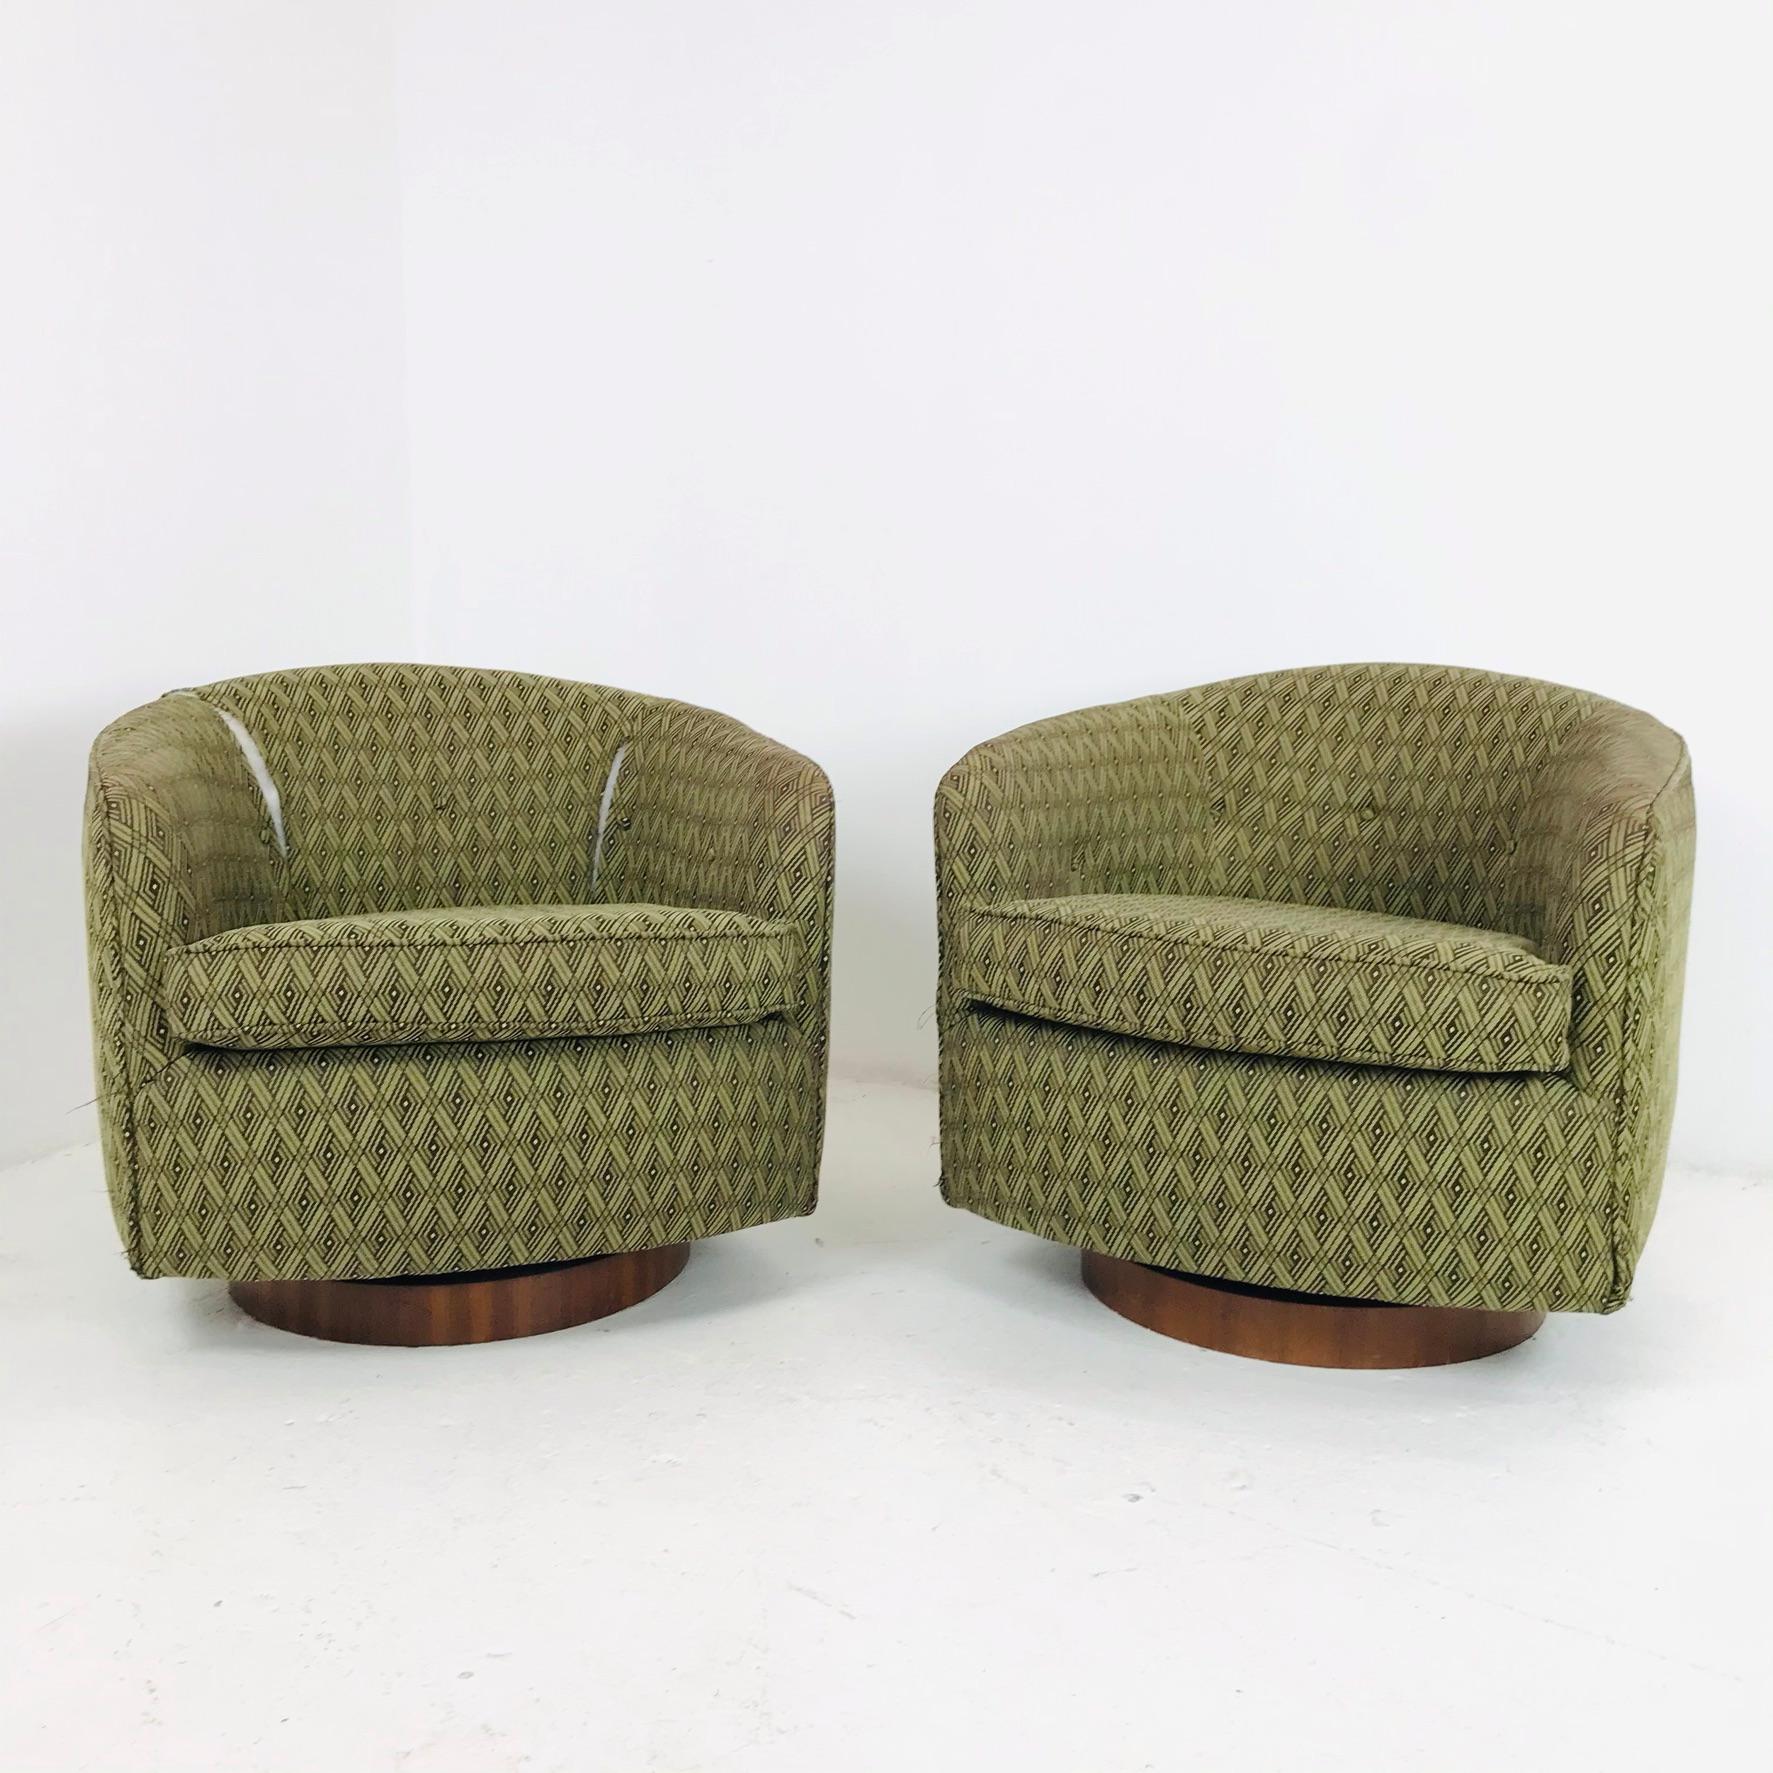 Beautiful pair of swivel chairs designed by Milo Baughman. Each chair has a circular wood plinth base that swivels with ease. Elegant in design, the chairs are also extremely comfortable, offering wonderful back support. Good structural condition -